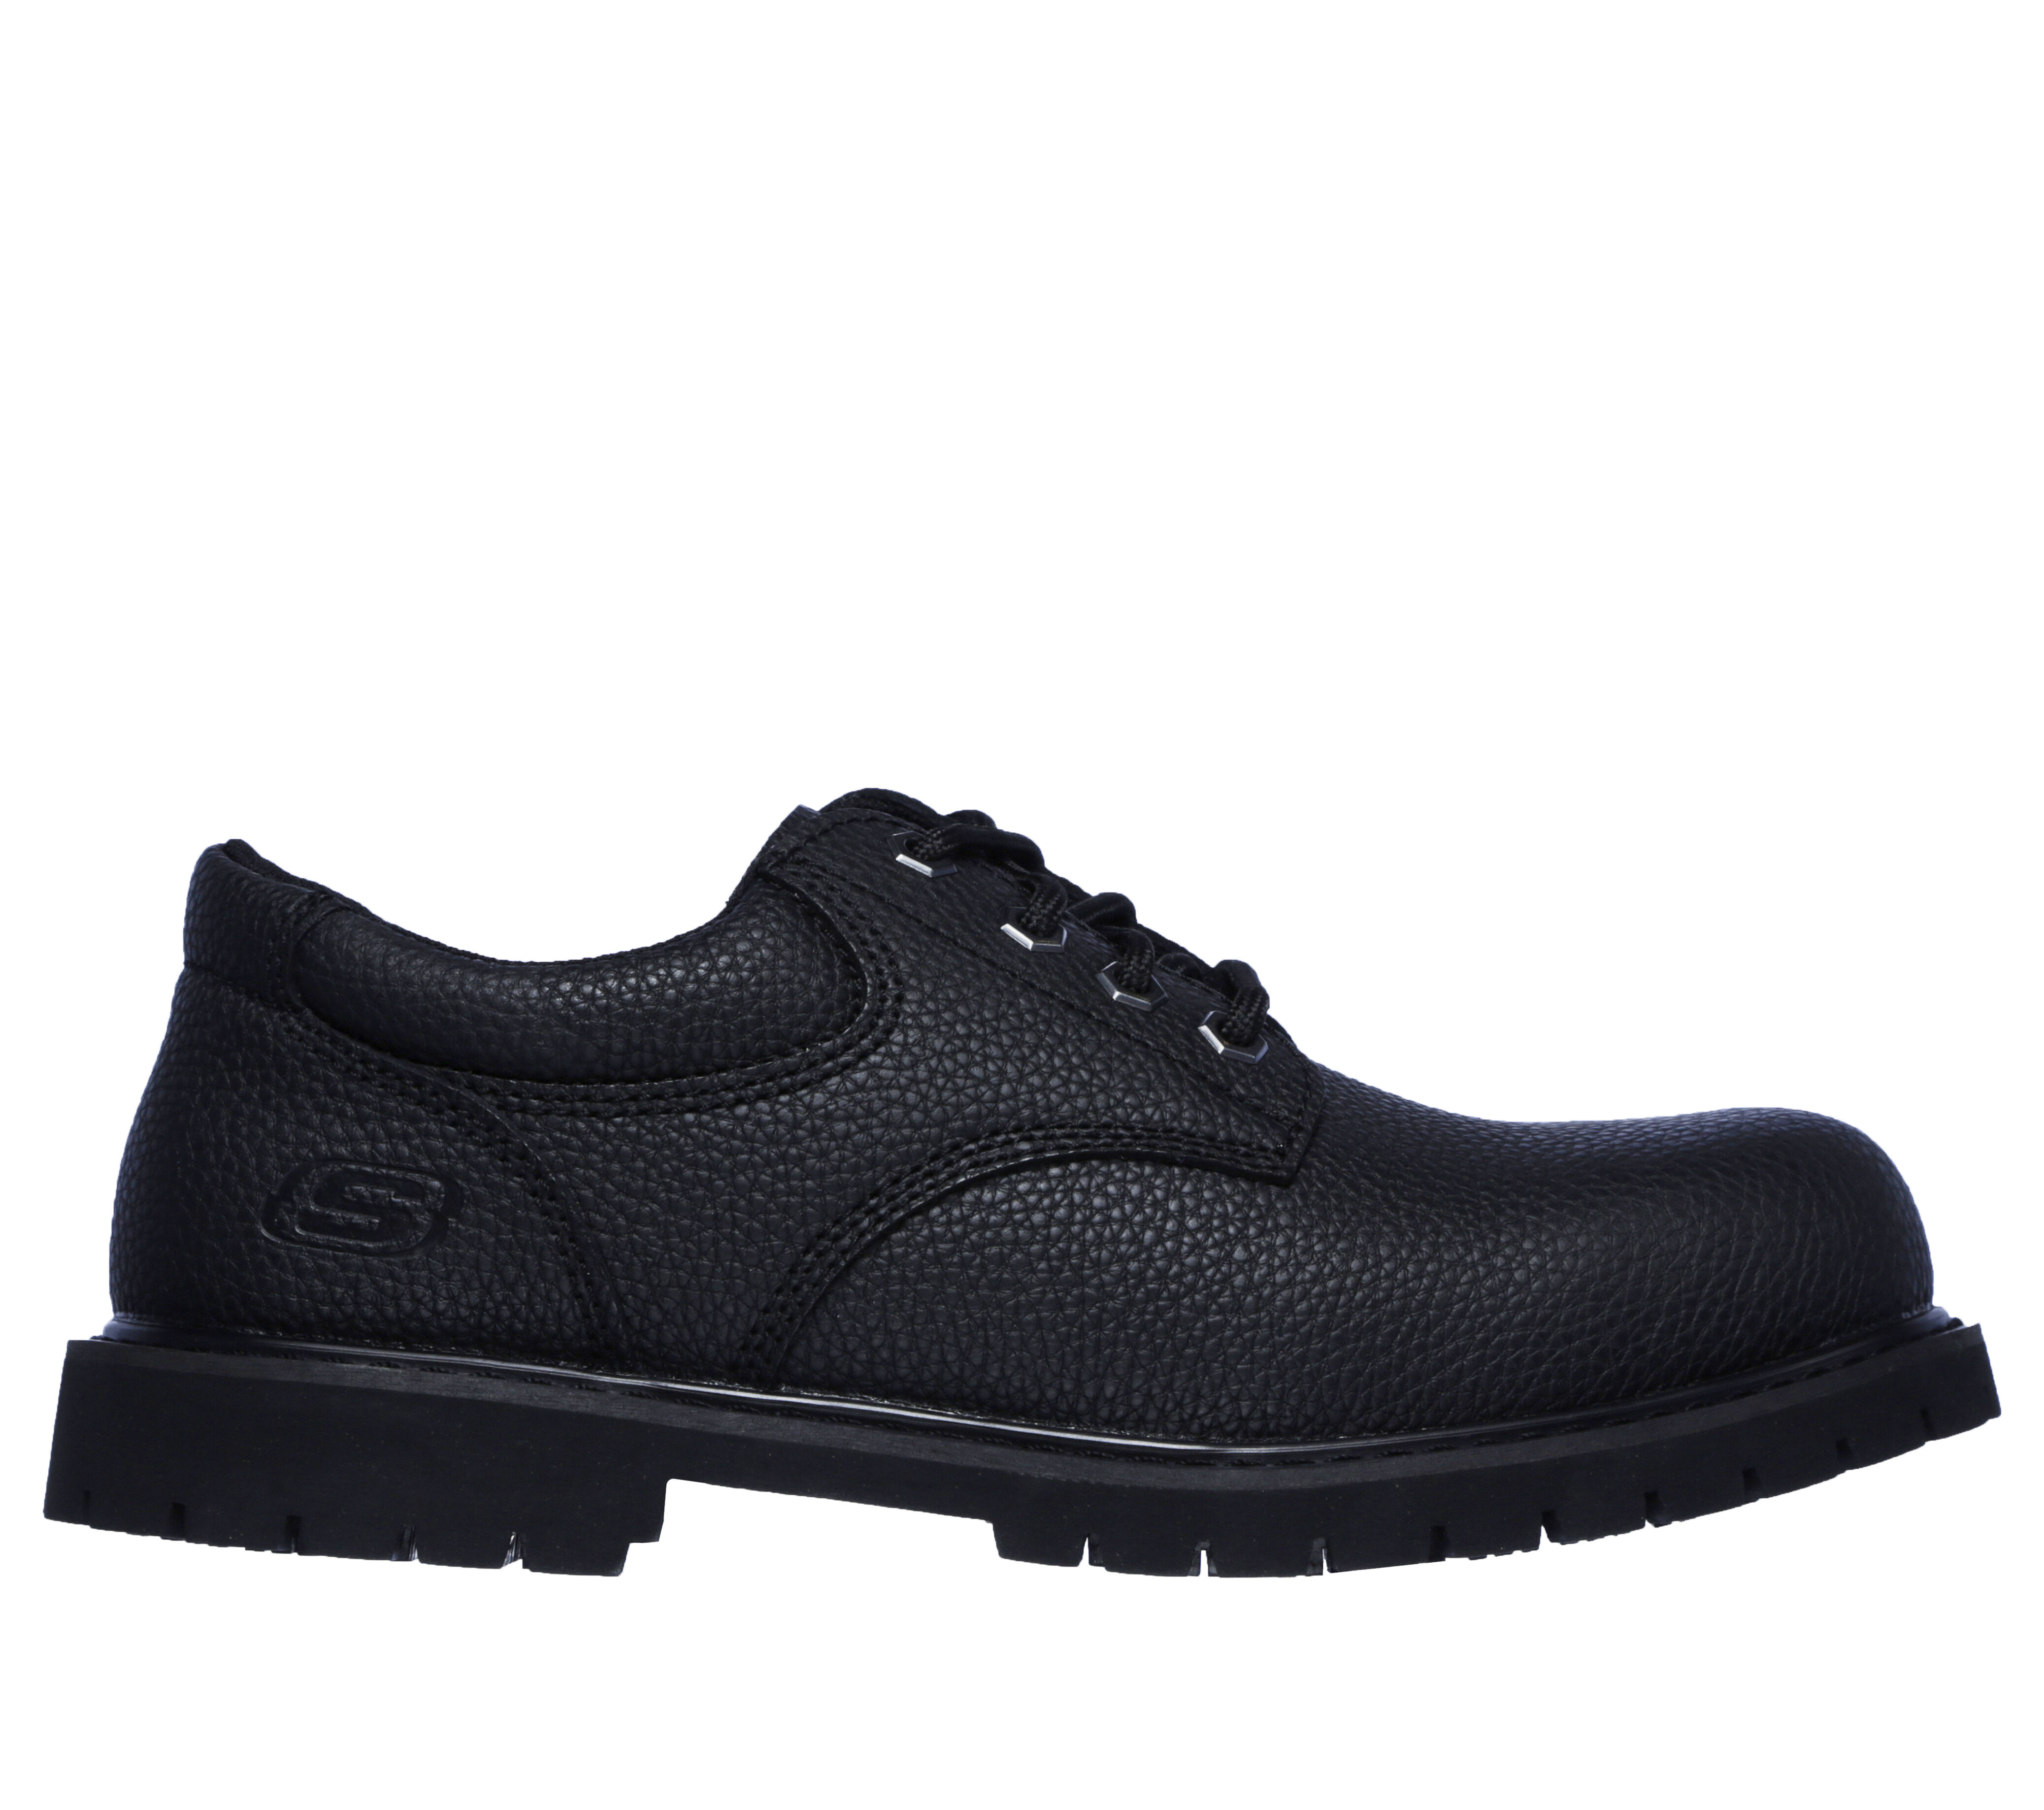 skechers guy thing oxford shoes